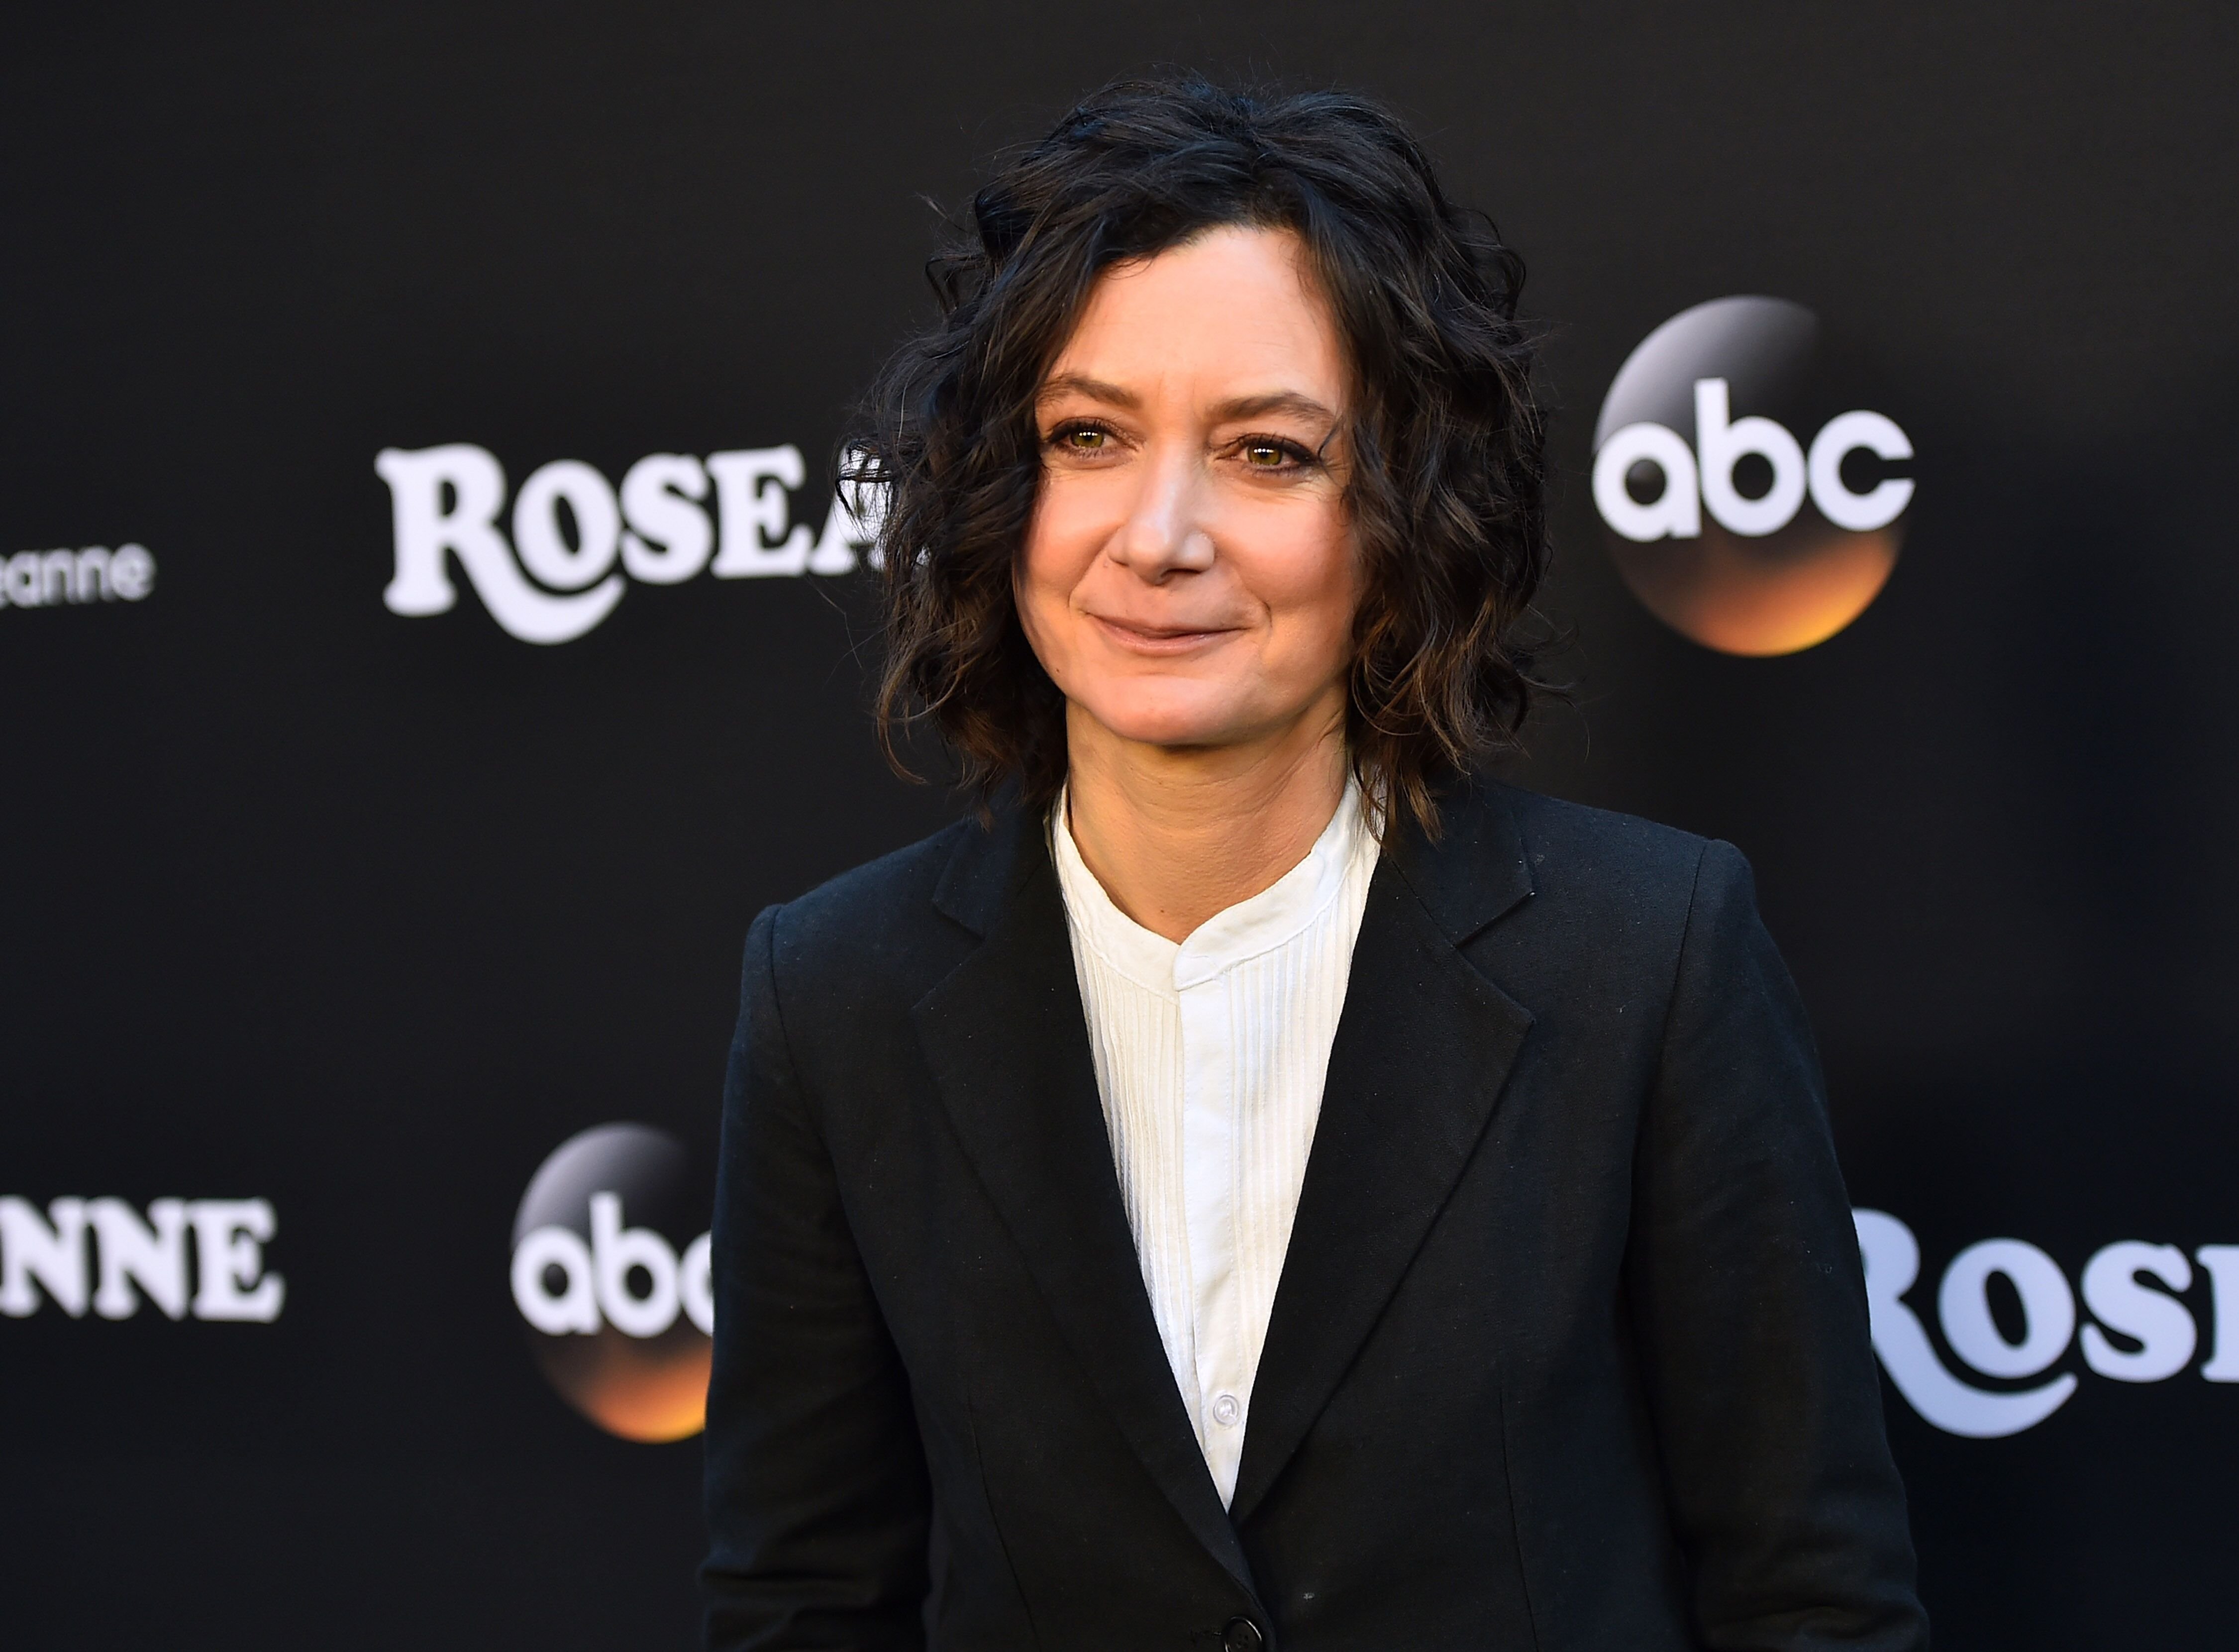 Sara Gilbert at the Roseanne event | Source: Getty Images